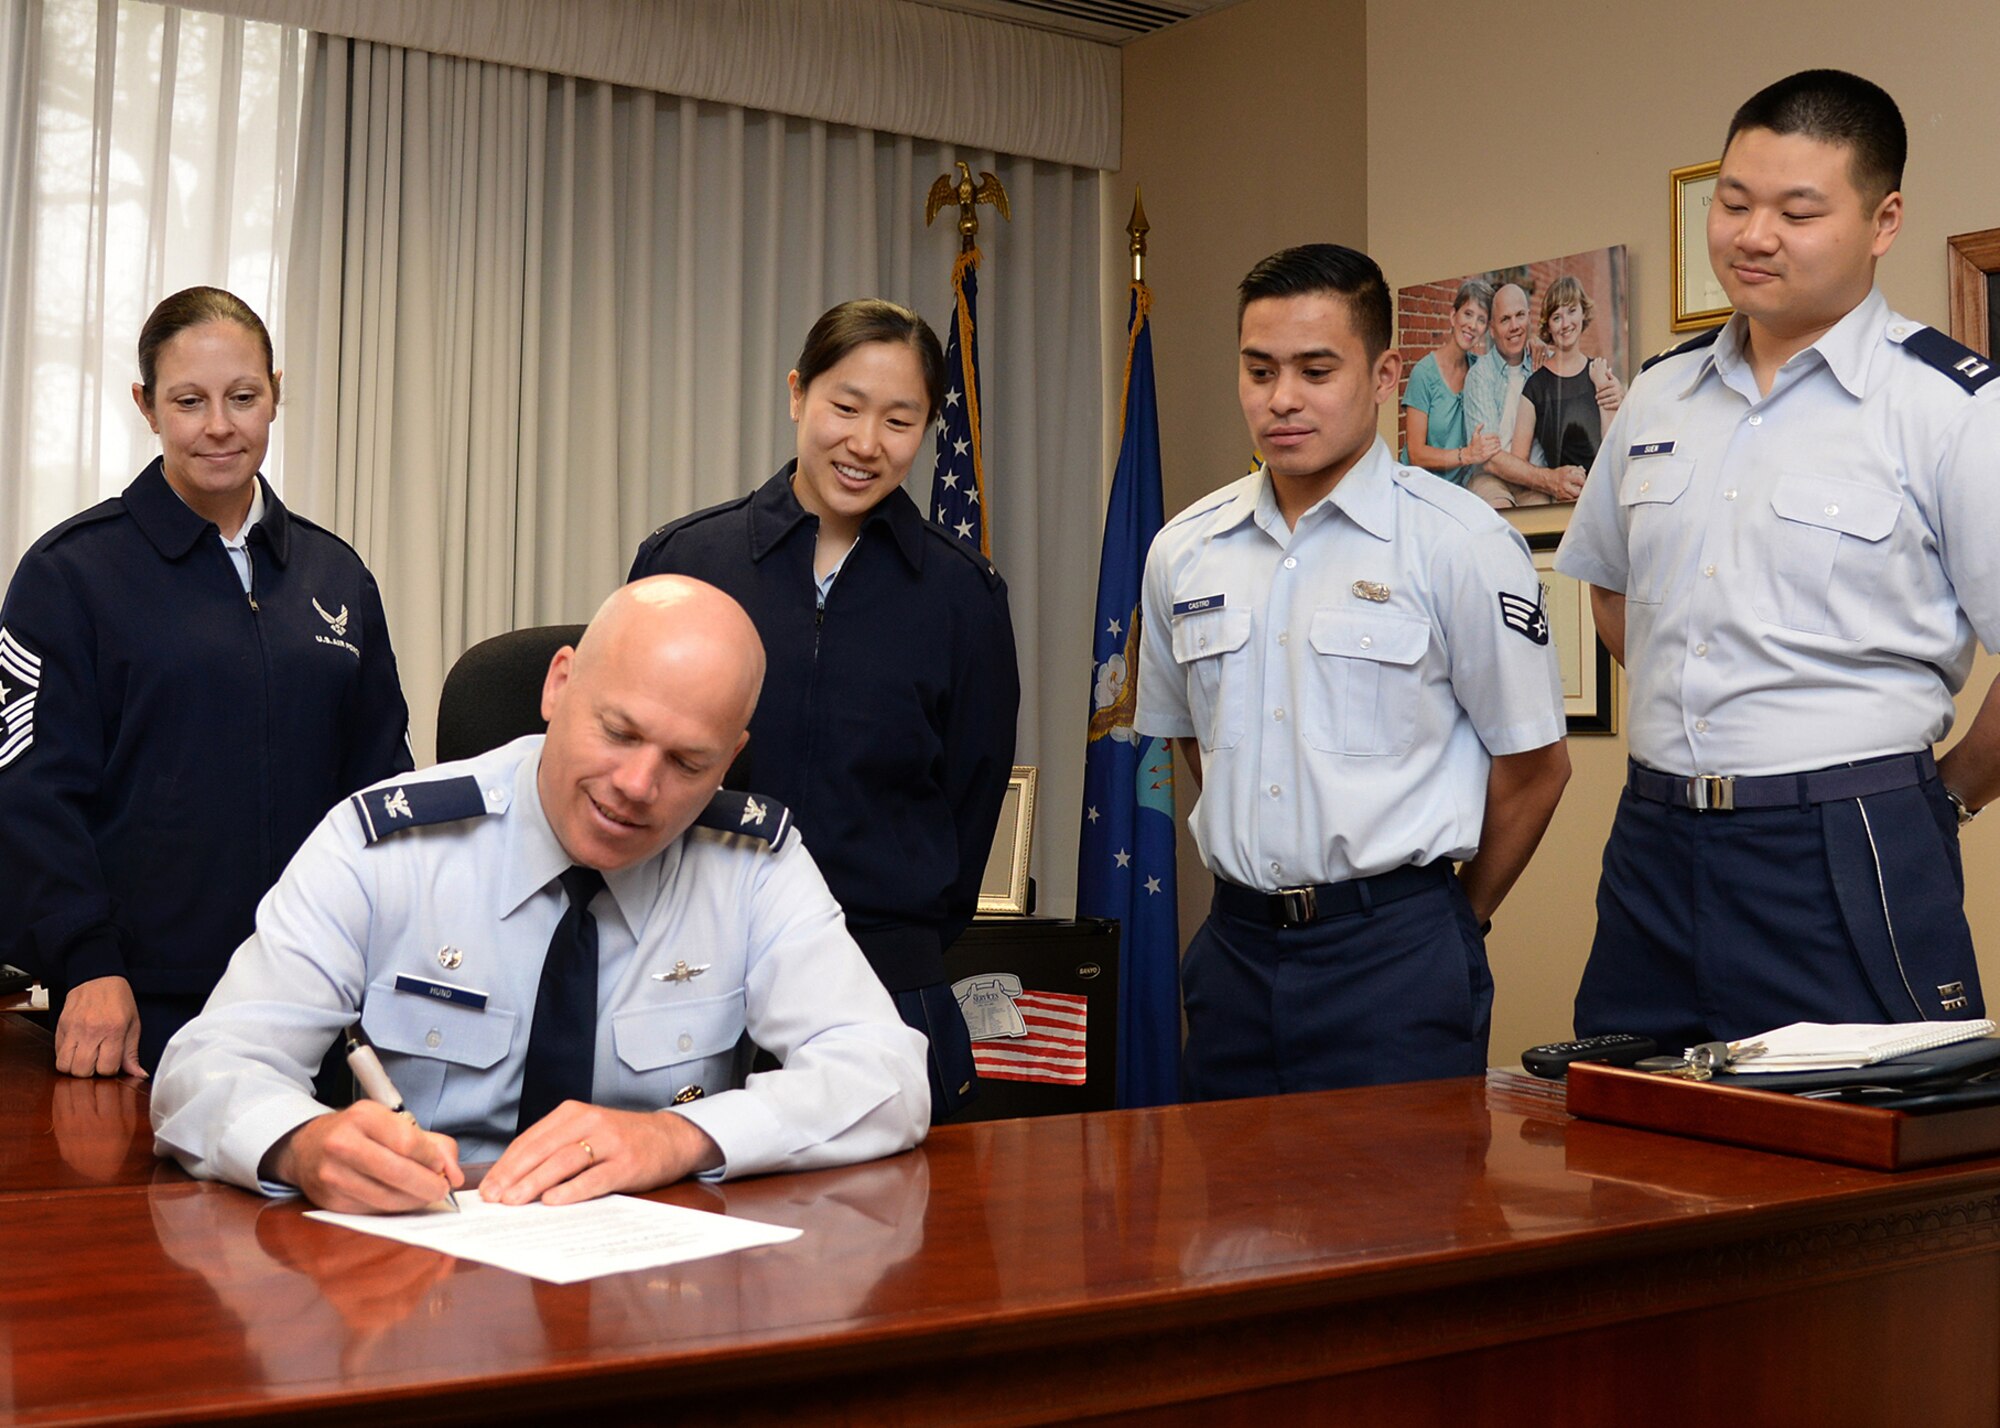 Col. Roman L. Hund, installation commander, signs a proclamation establishing May as Asian American Pacific Islander Heritage Month at Hanscom Air Force Base, Mass., May 1, while Command Chief Master Sgt. Patricia L. Hickey, left, 1st Lt. Yeoju Kim, Senior Airman Martin Jerome Castro and Capt. Kenneth Suen look on. The proclamation calls upon all military, civilian and family members at Hanscom to mark the monthlong observance by participating in base wide activities, sponsored by the Asian Pacific American Heritage committee. (U.S. Air Force photo Linda LaBonte Britt)